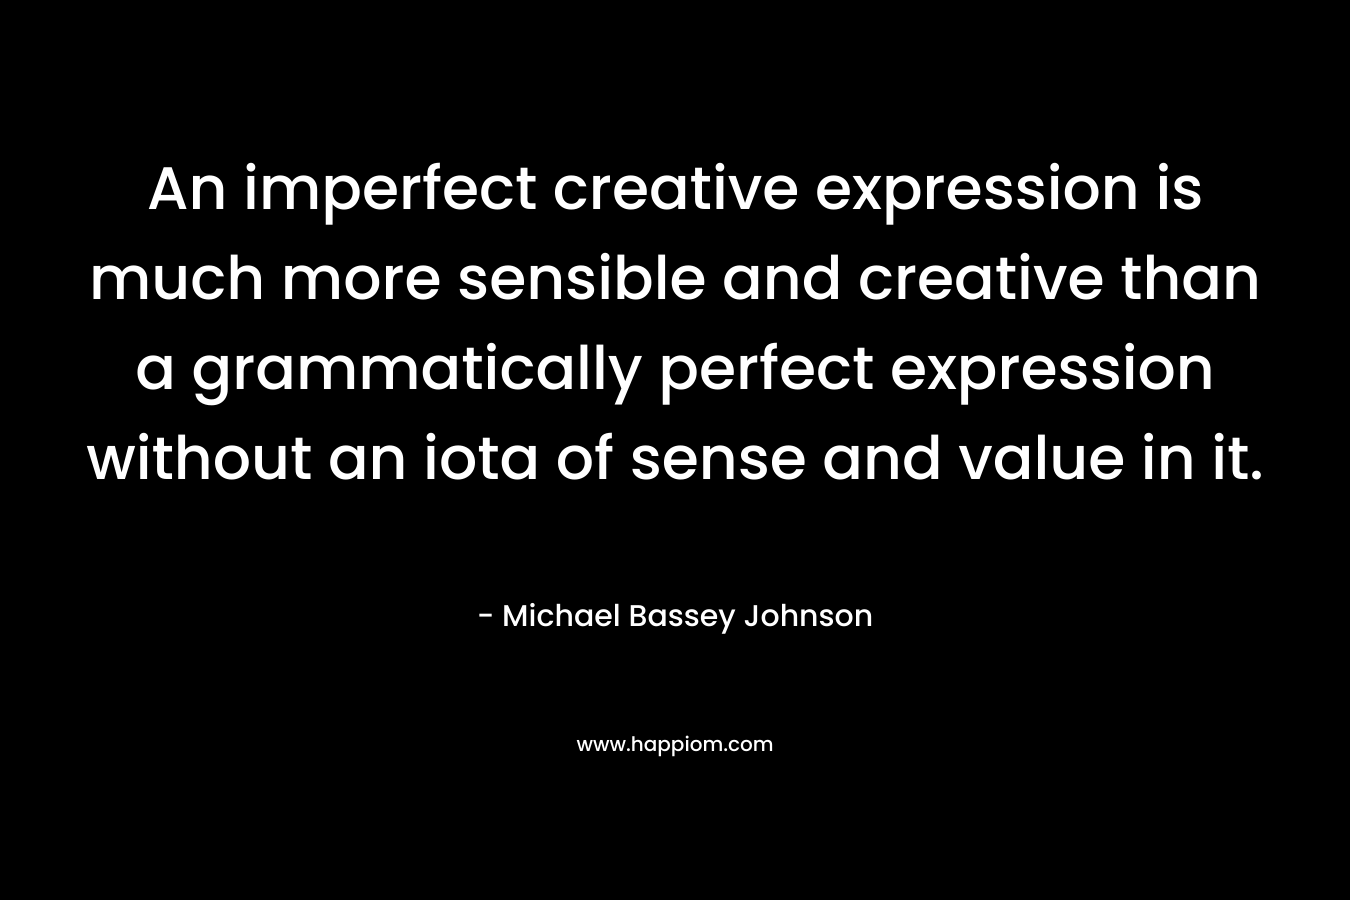 An imperfect creative expression is much more sensible and creative than a grammatically perfect expression without an iota of sense and value in it.